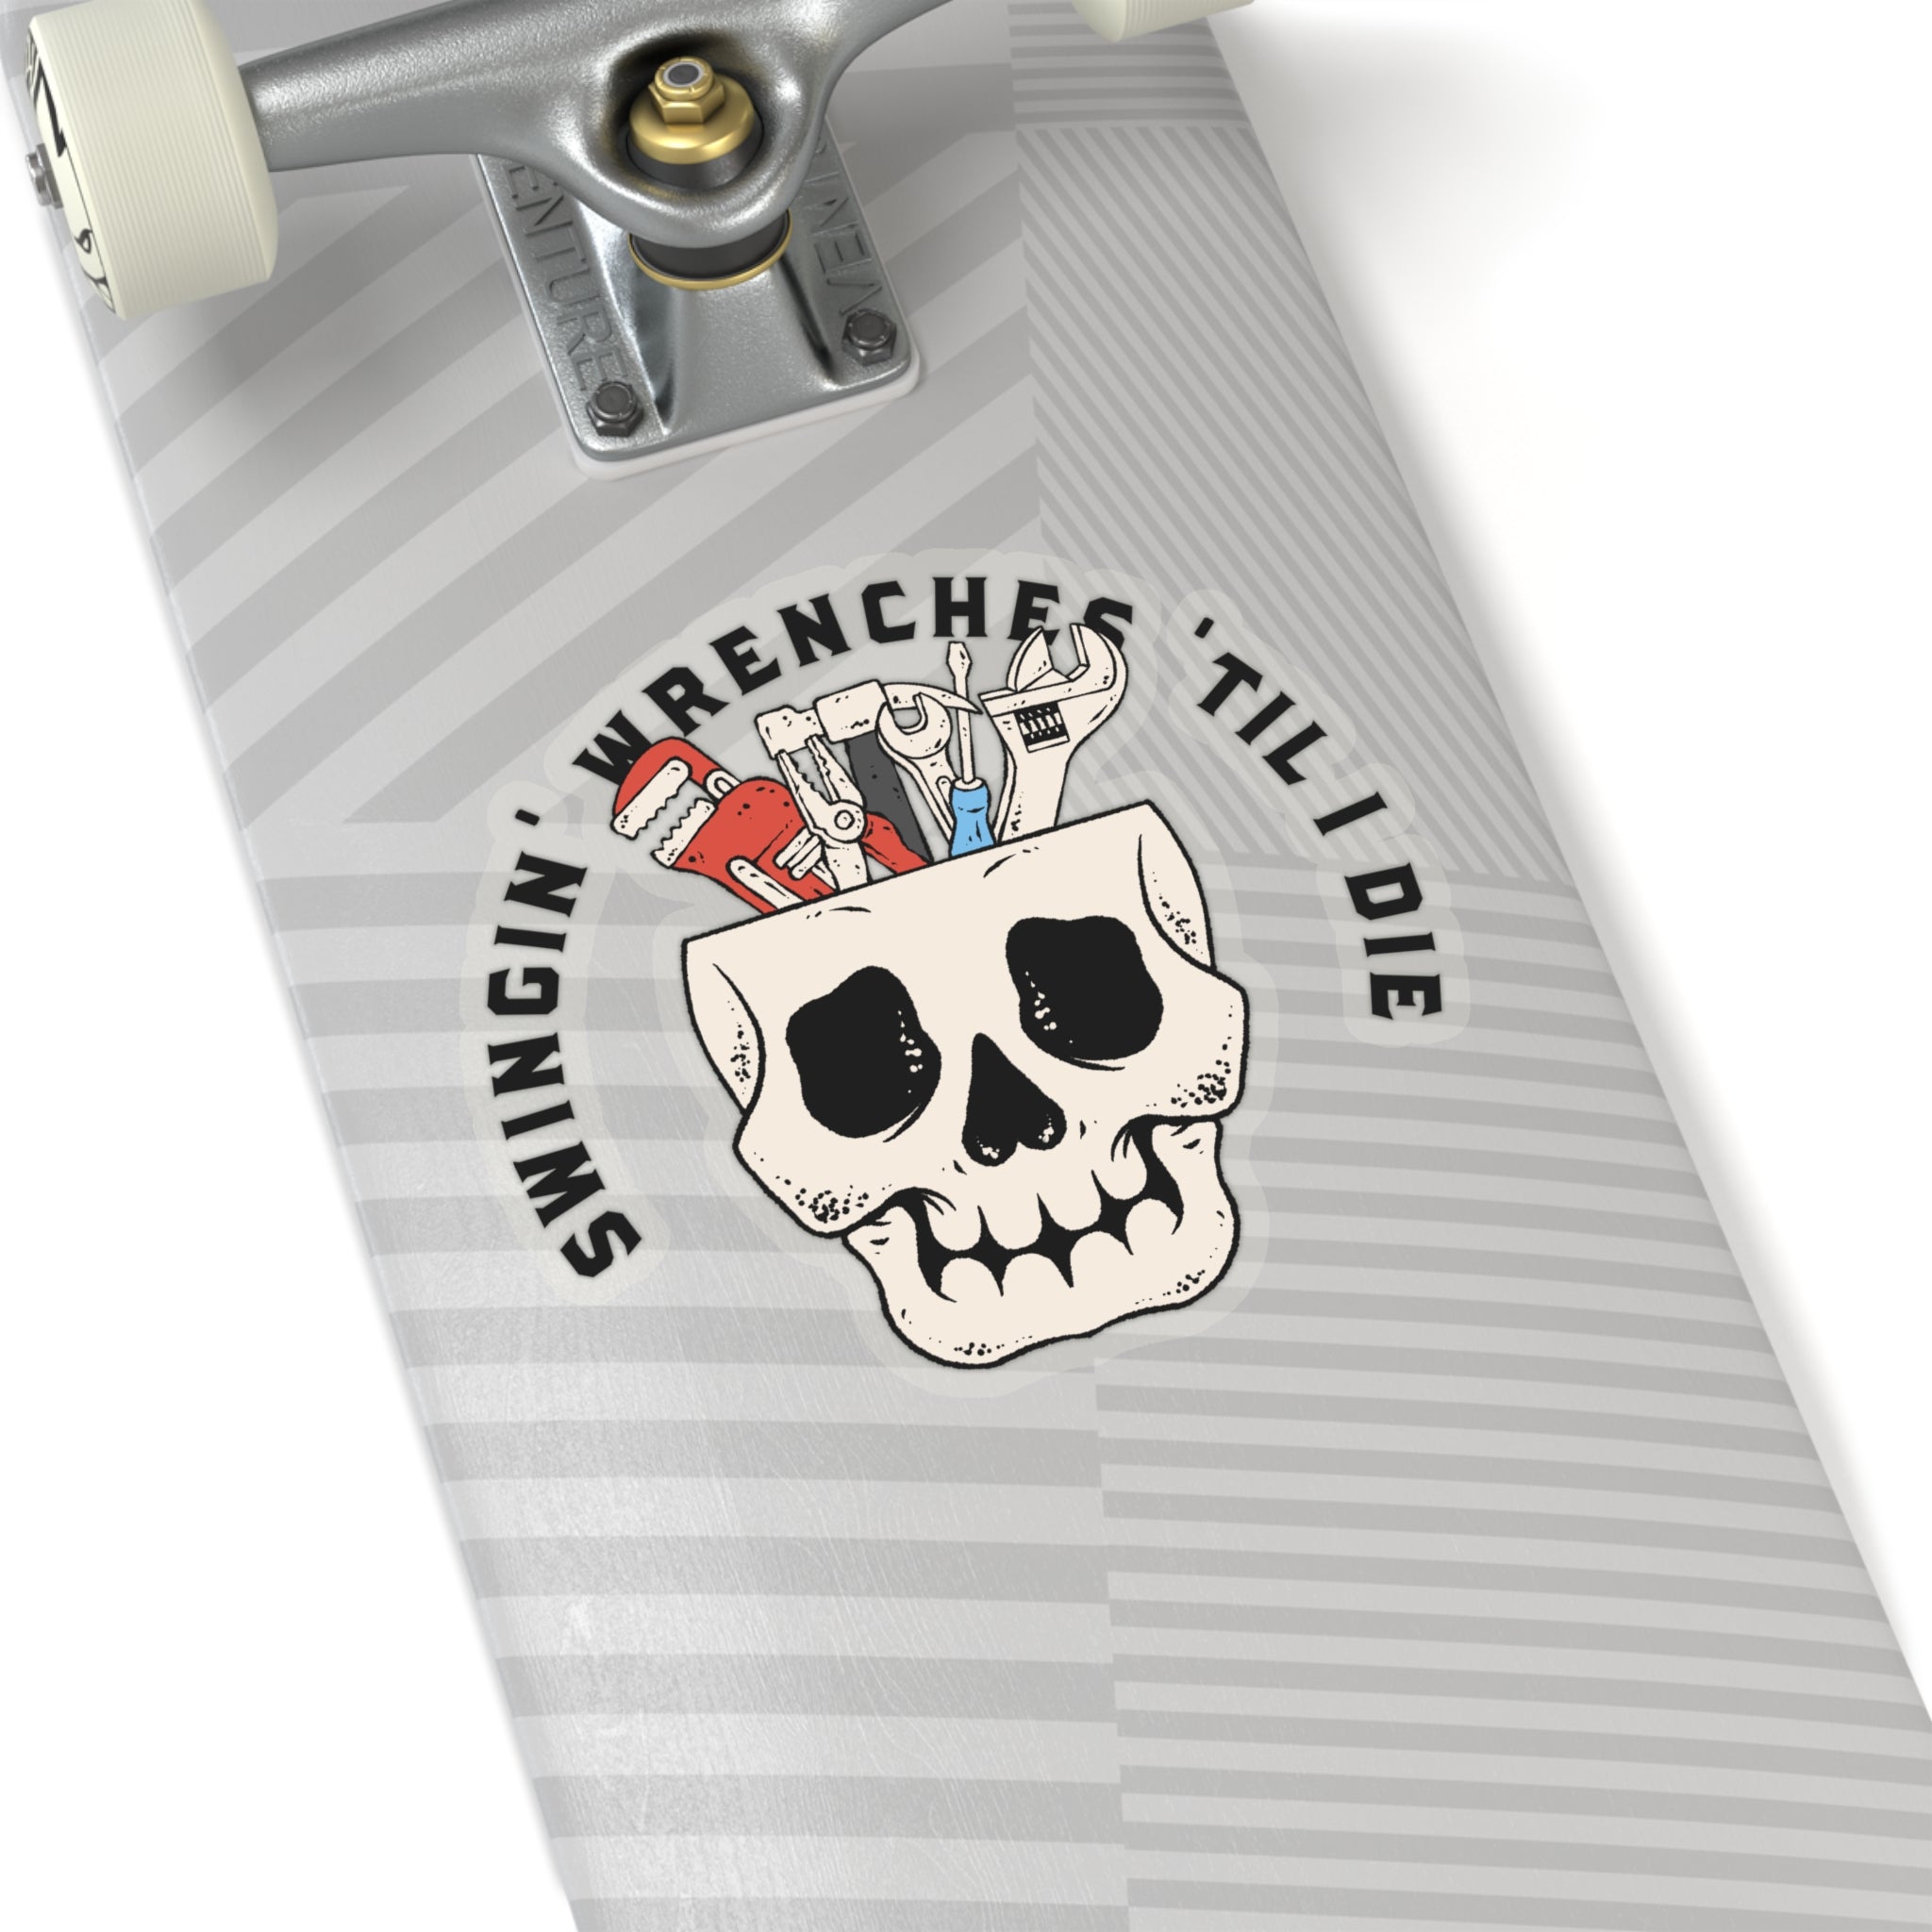 Swingin' Wrenches Decal